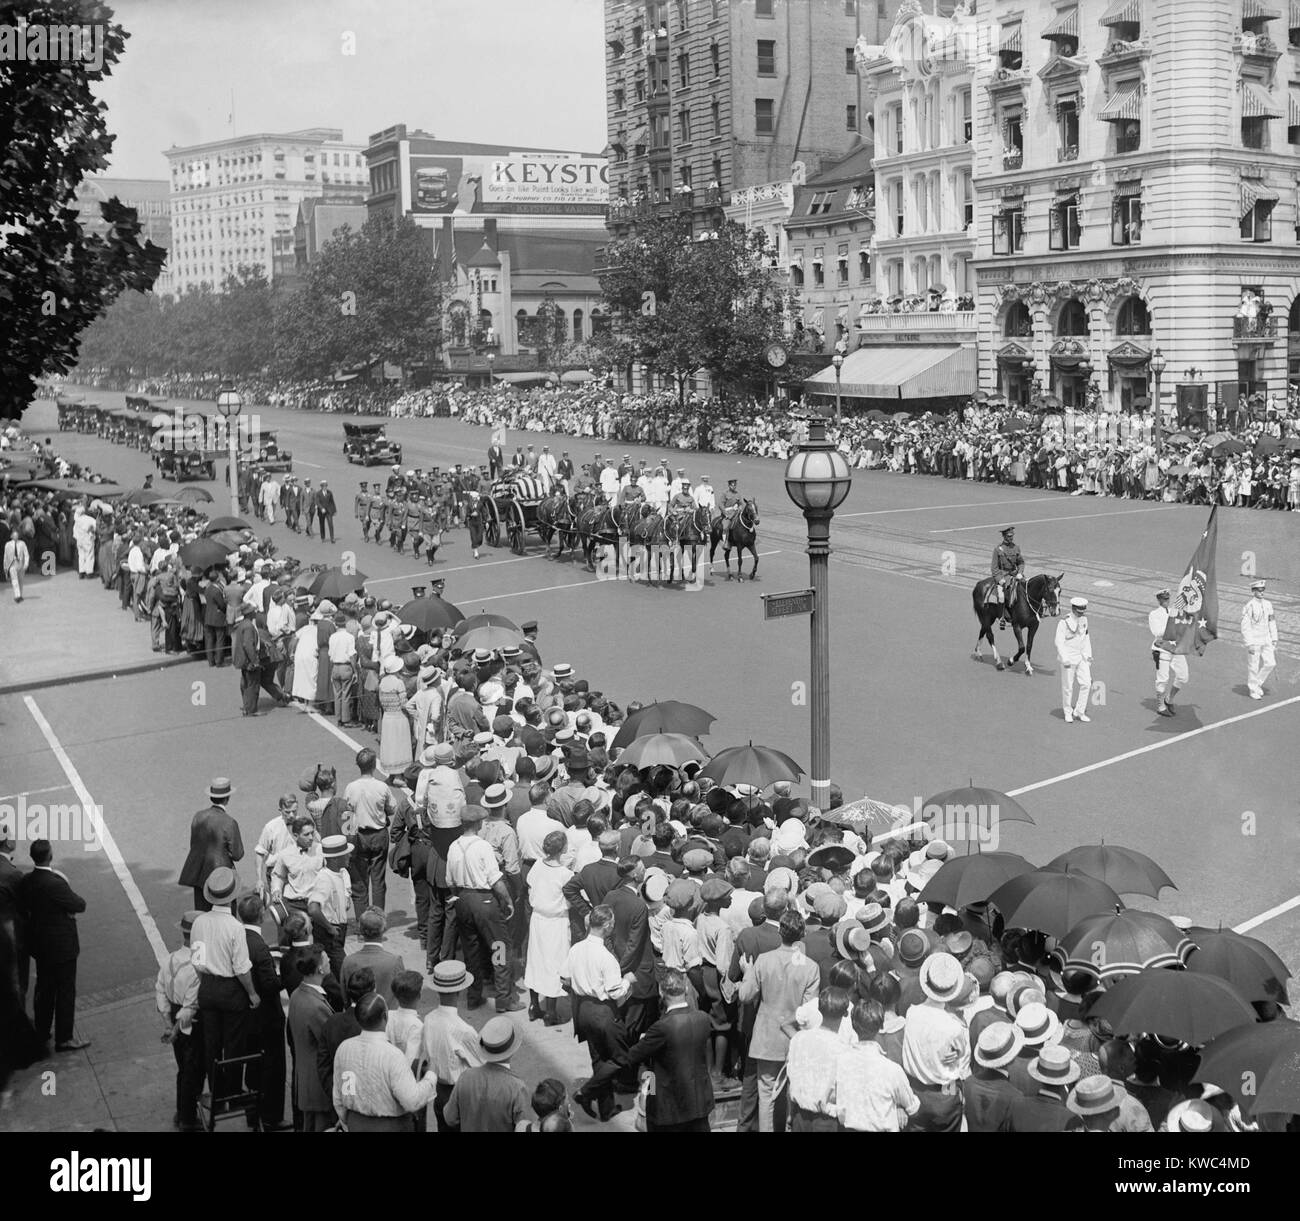 President Warren Harding's funeral procession, Aug. 8, 1923, on Pennsylvania Avenue. The procession marched from the White House to the Capitol, where the funeral service was held before the Congress, the Cabinet, and a group of invited dignitaries. (BSLOC 2015 15 82) Stock Photo